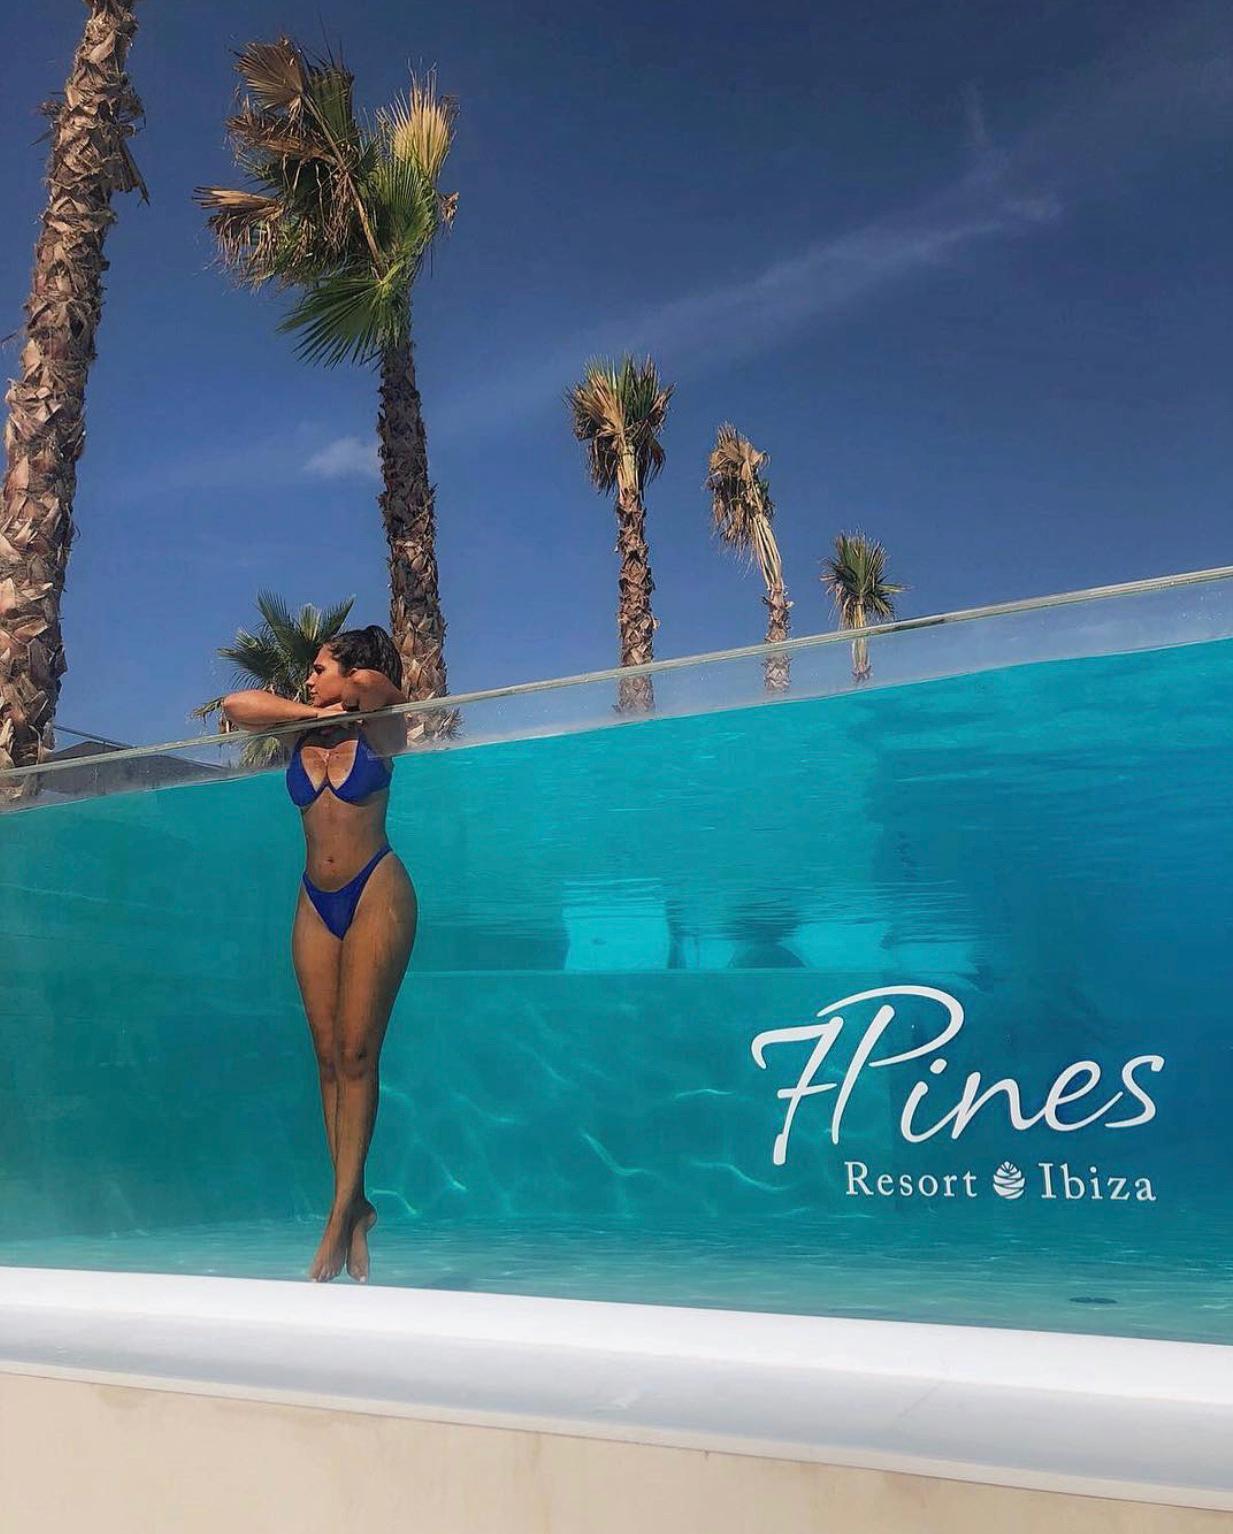 Instagrammable places in Ibiza: 7 pines ibiza